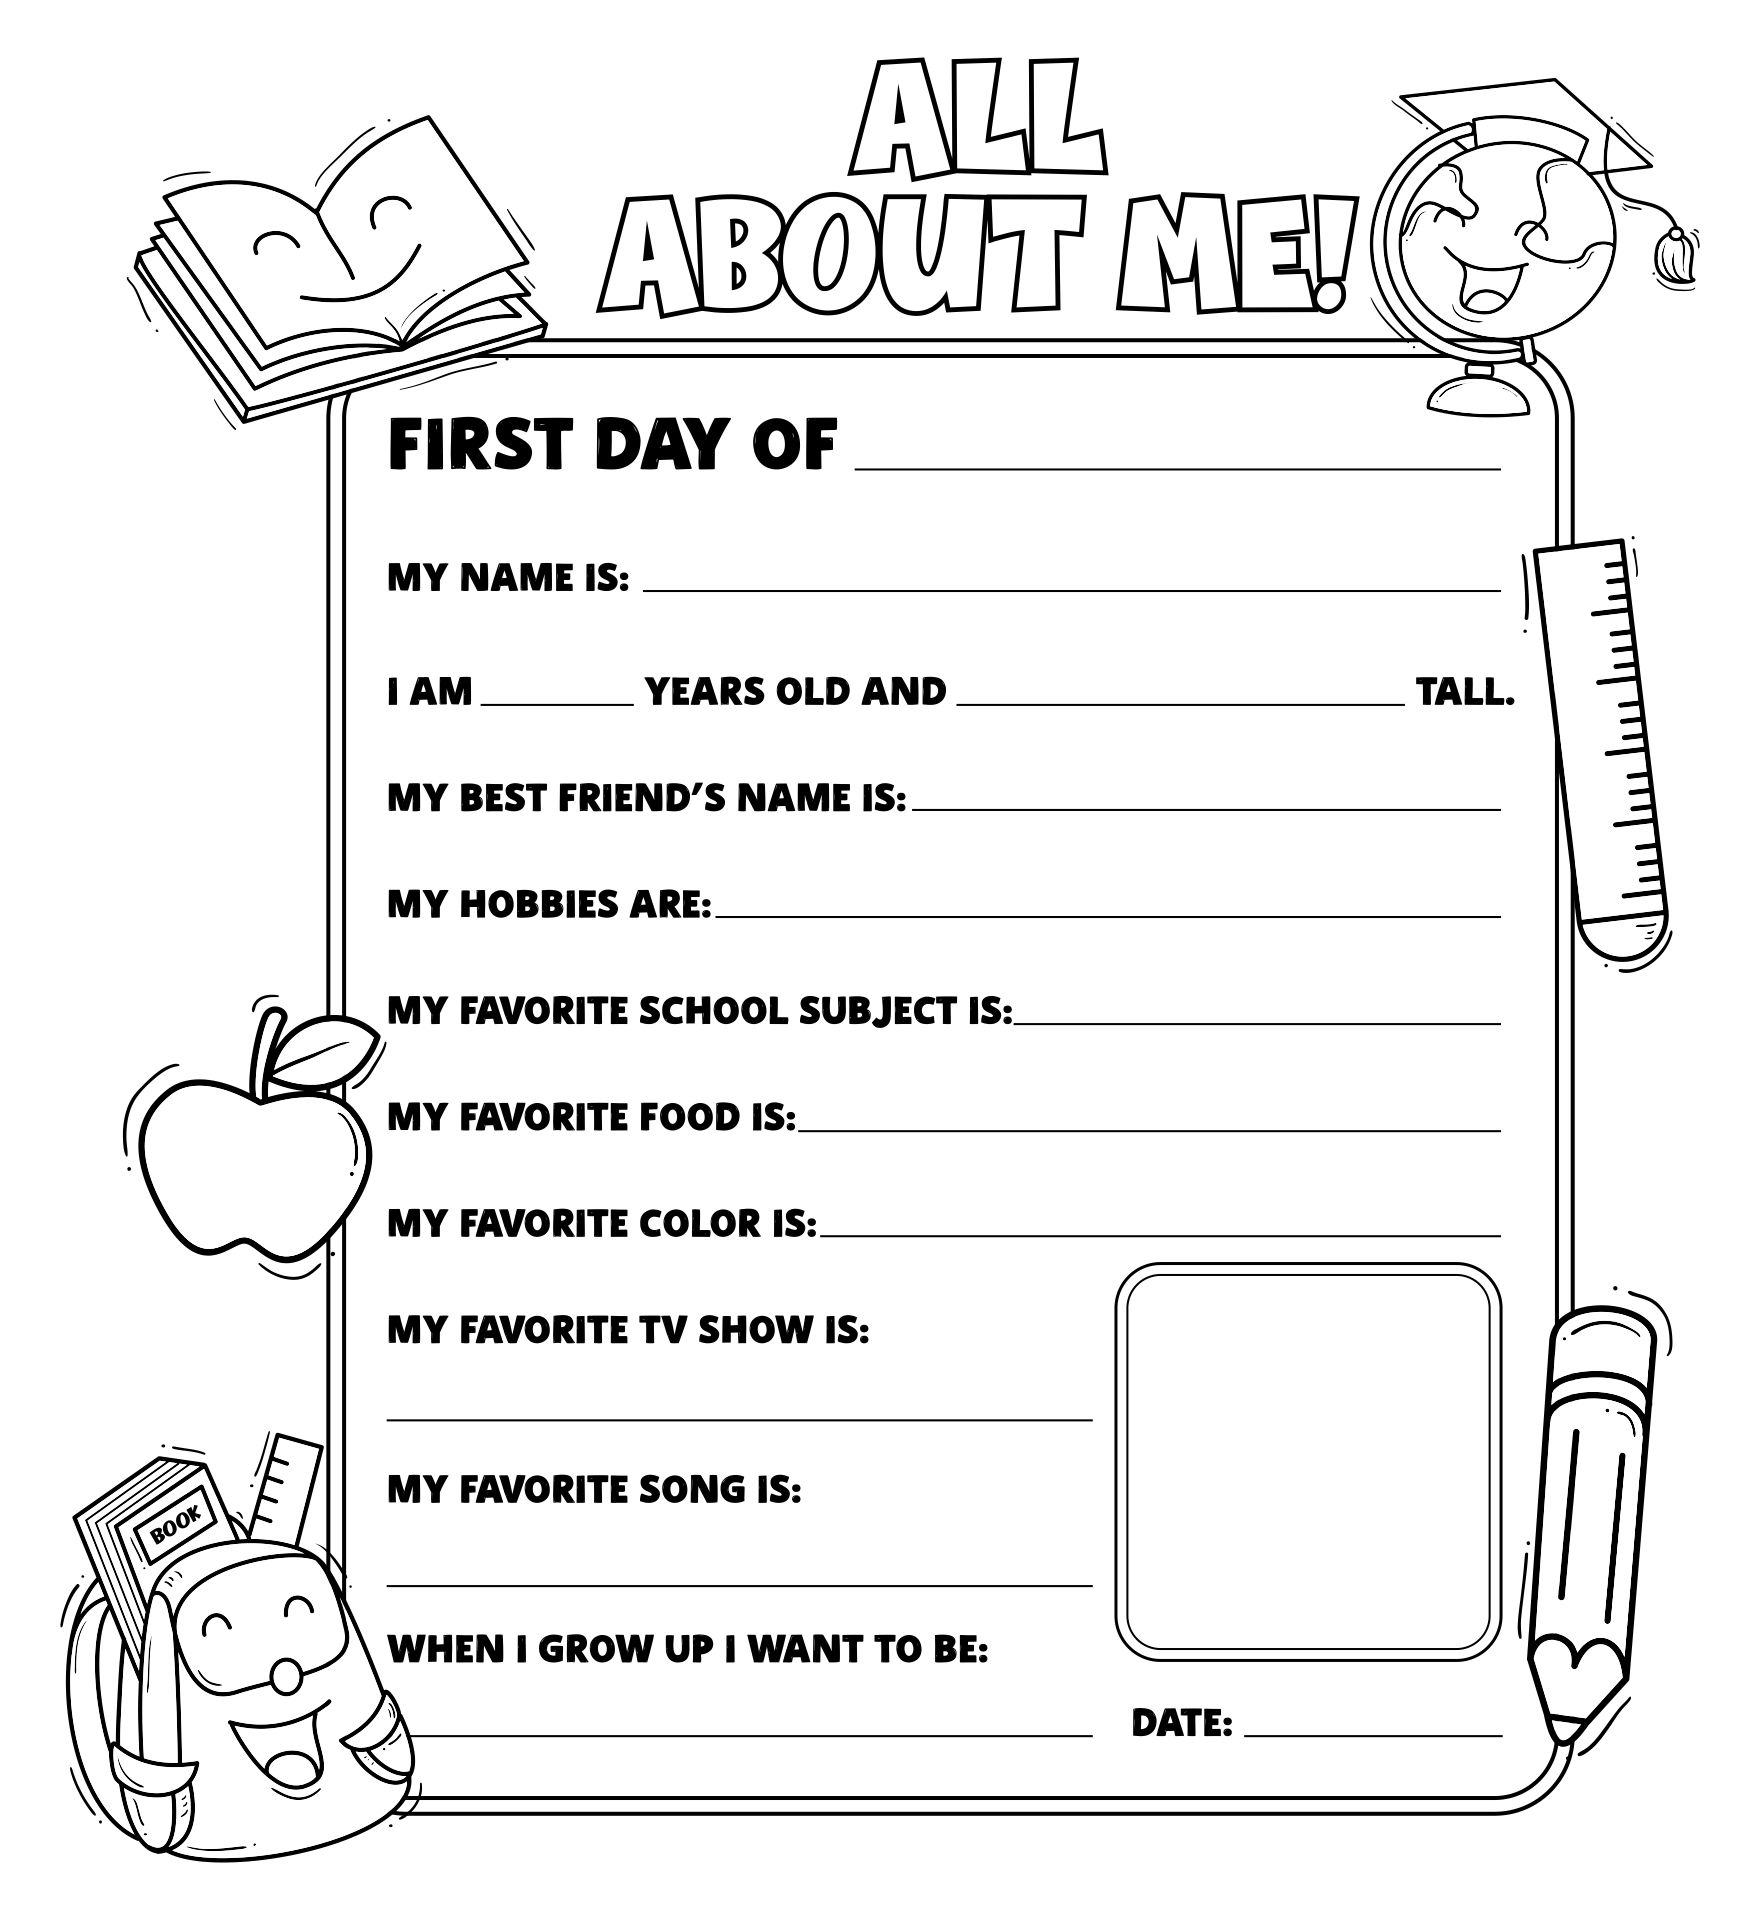 Back To School All About Me Questionnaire Printable Poster